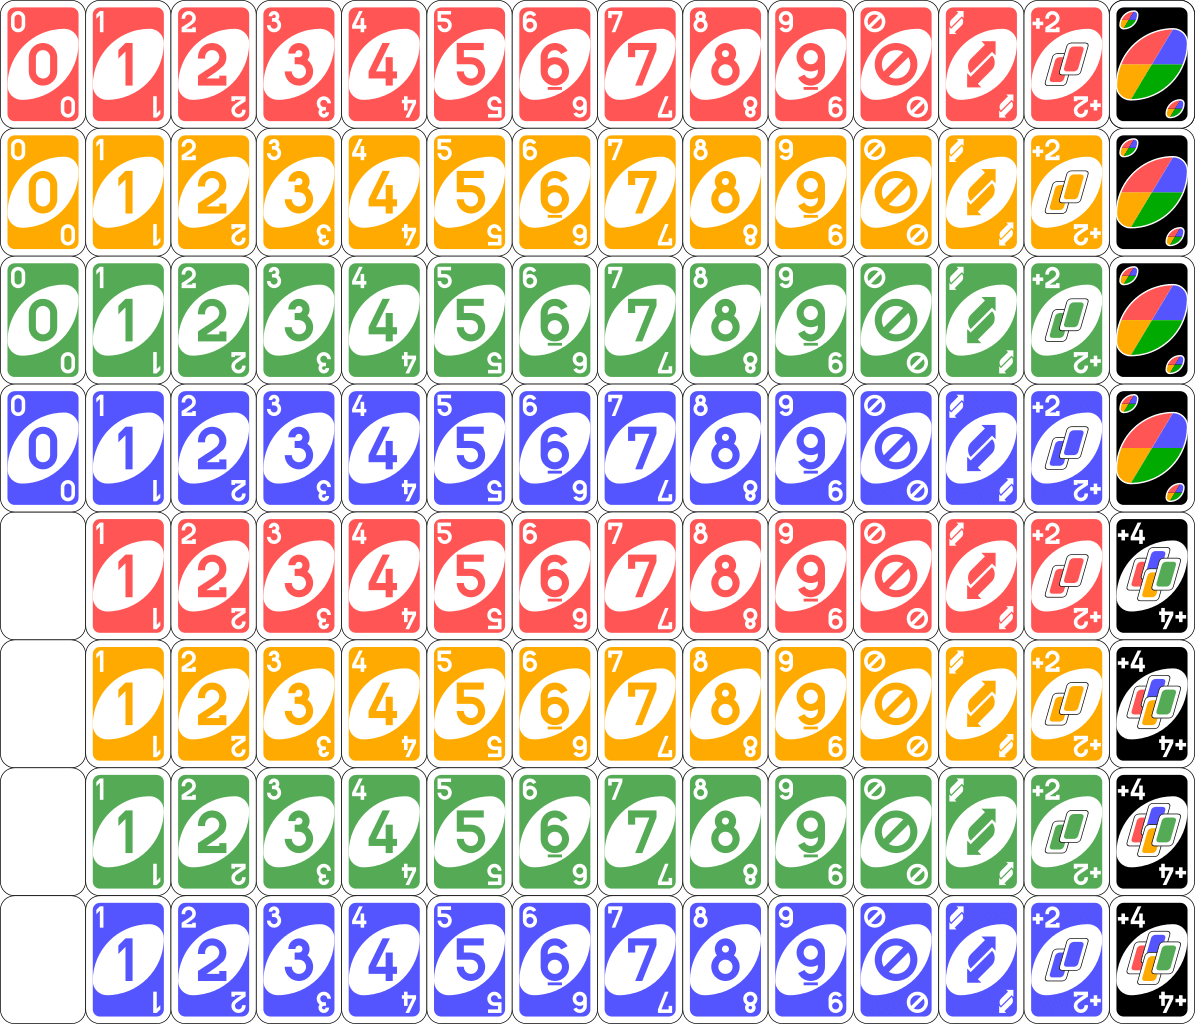 A sample deck of UNO cards, with all colors and values shown